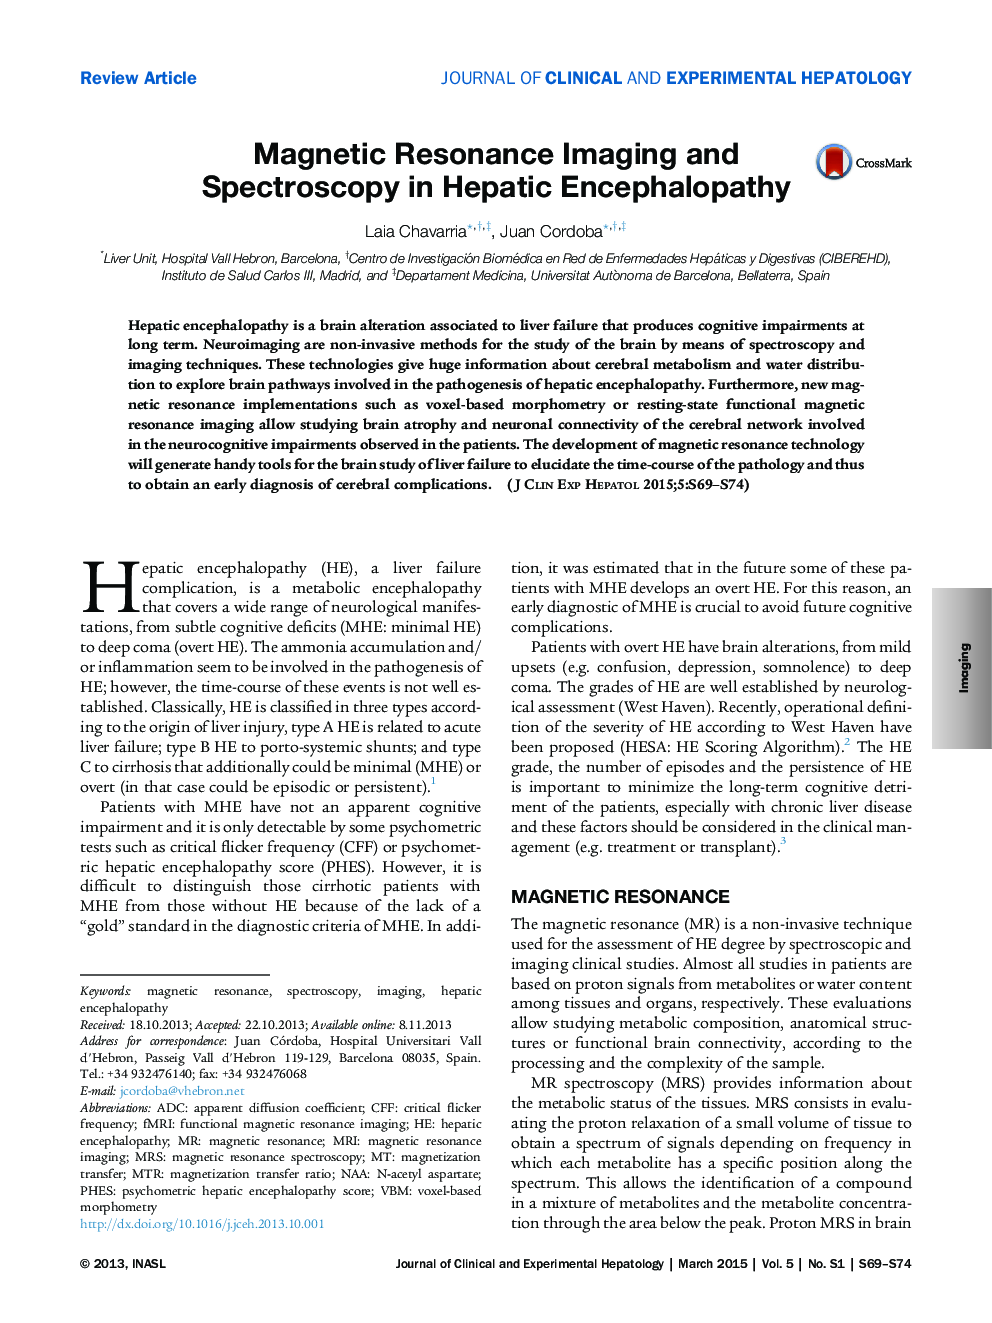 Magnetic Resonance Imaging and Spectroscopy in Hepatic Encephalopathy